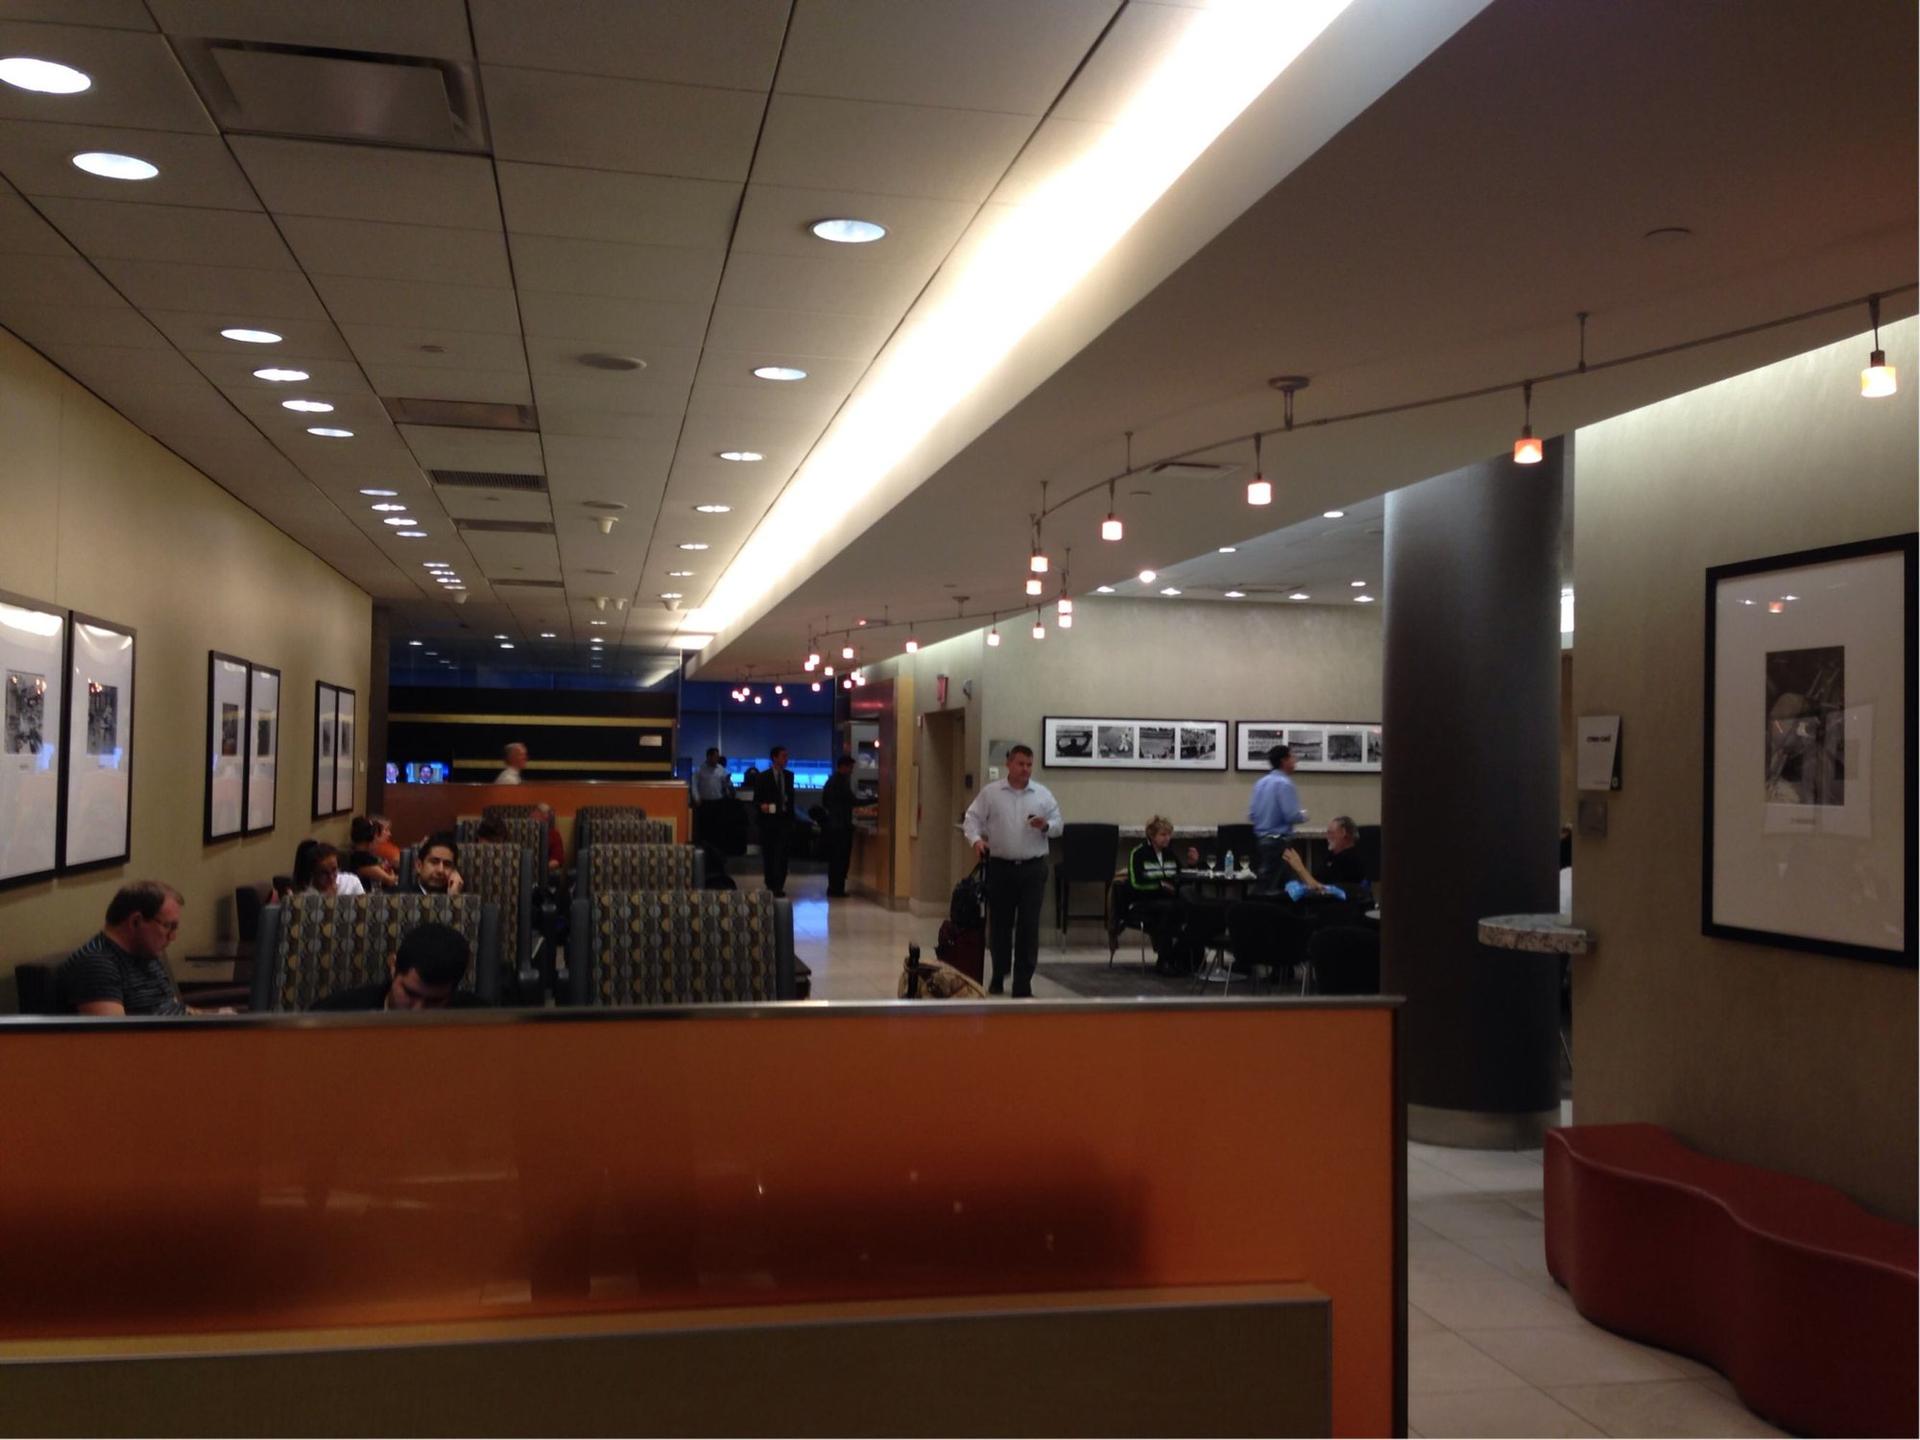 American Airlines Admirals Club image 6 of 25